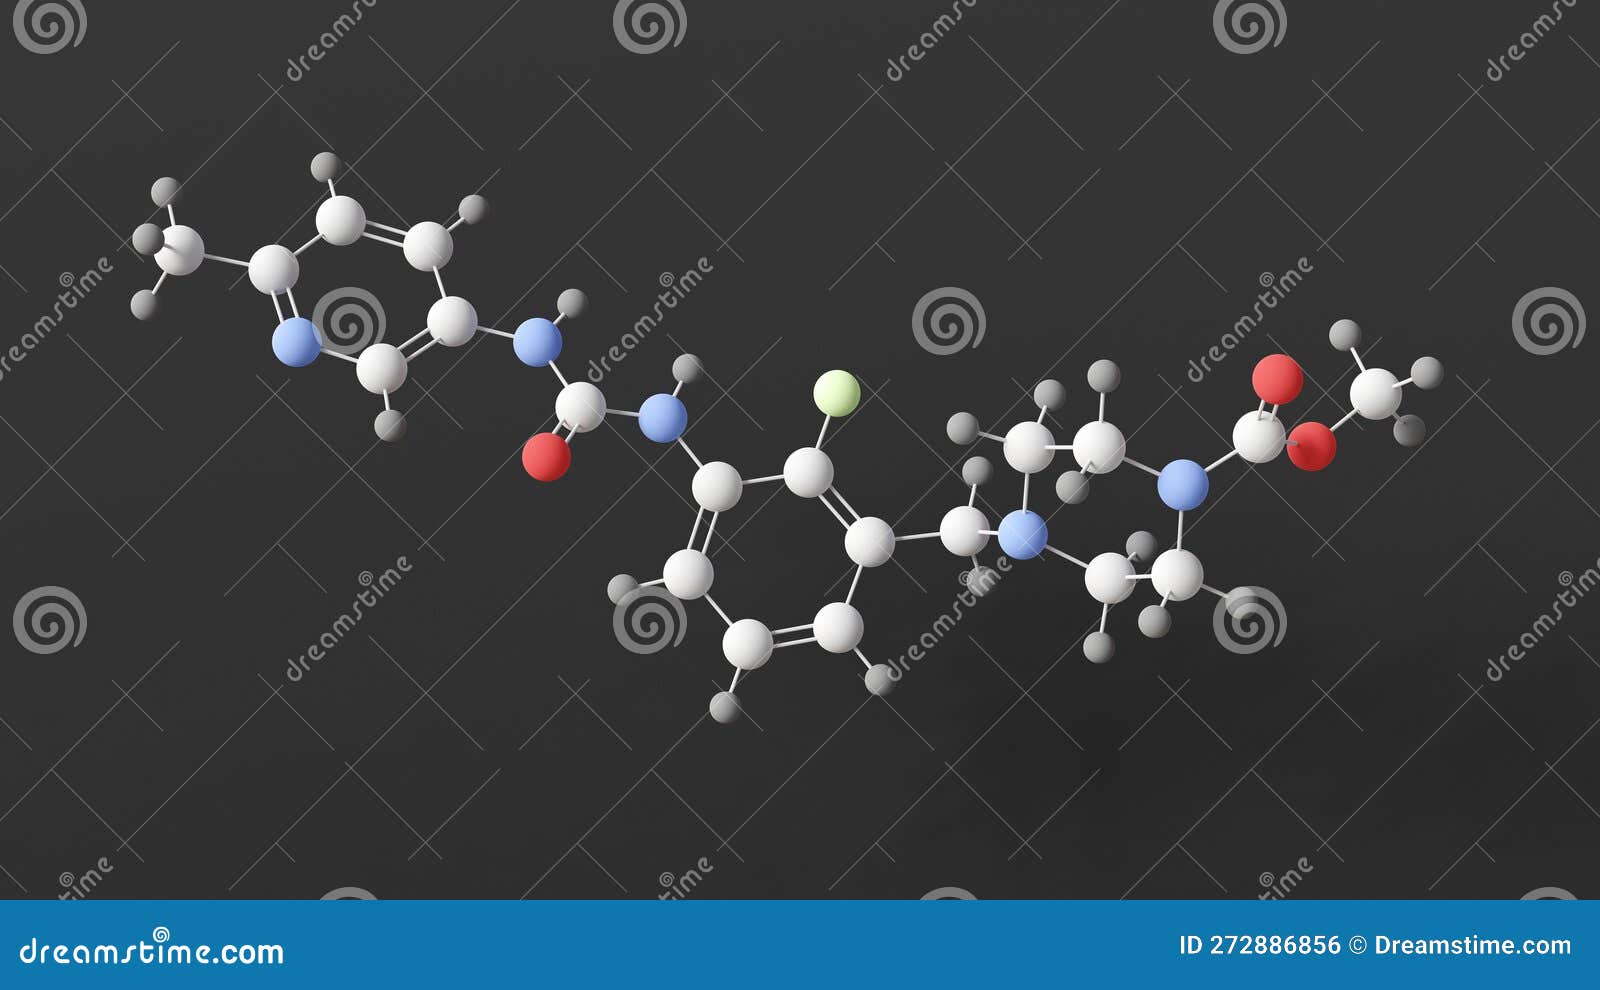 omecamtiv mecarbil molecule, molecular structure, cardiac-specific myosin activator, ball and stick 3d model, structural chemical